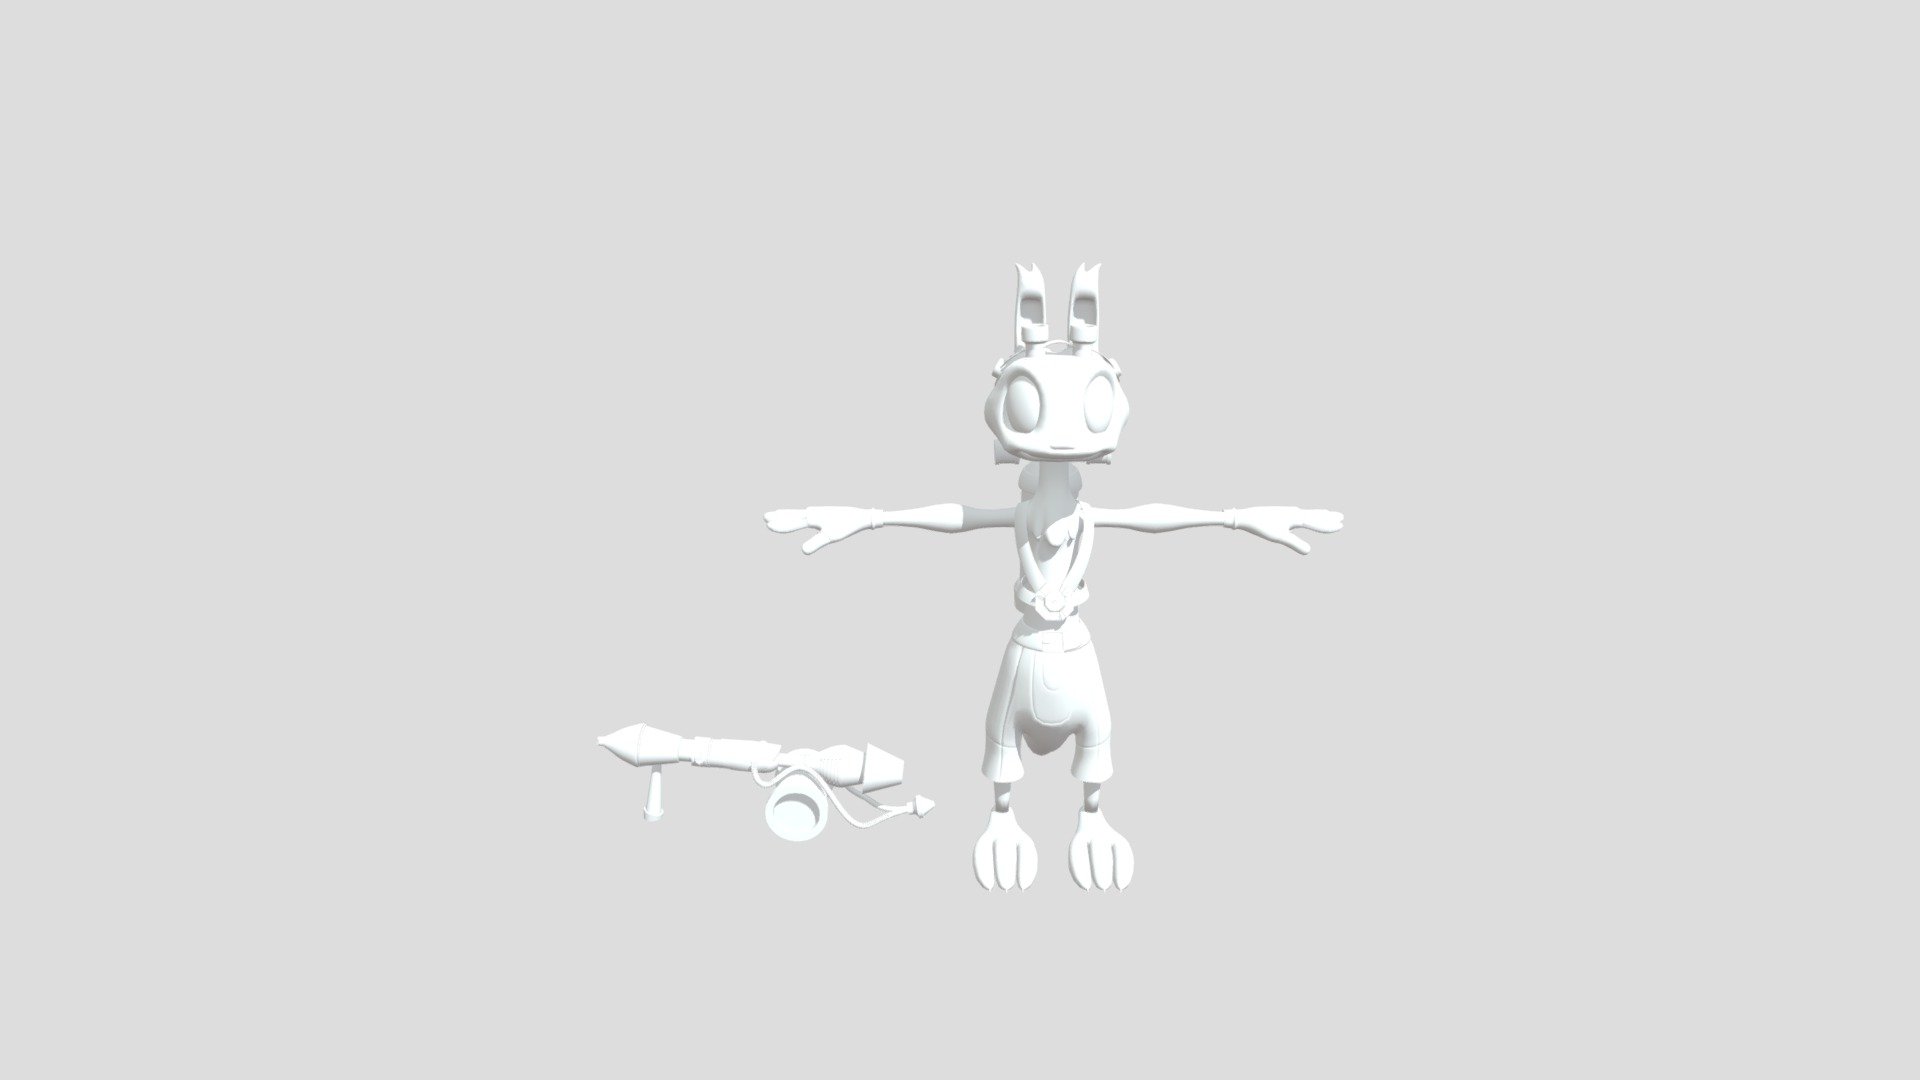 Daxter Lowpoly (Ropa y armas) - 3D model by Andrés_Repiso (@PET4BYTE5 ...